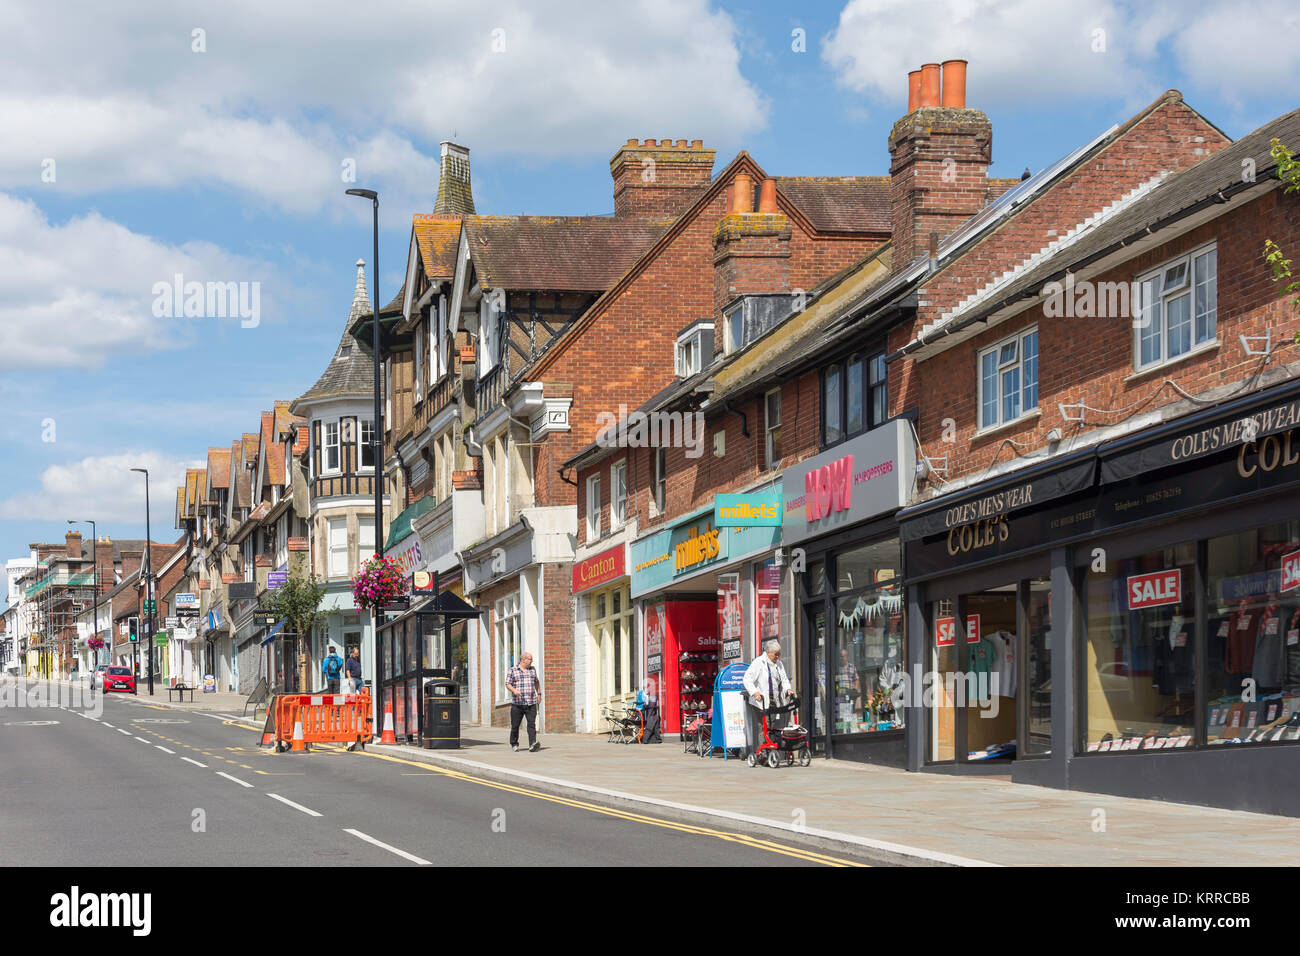 High Street, Uckfield, East Sussex, England, Regno Unito Foto Stock